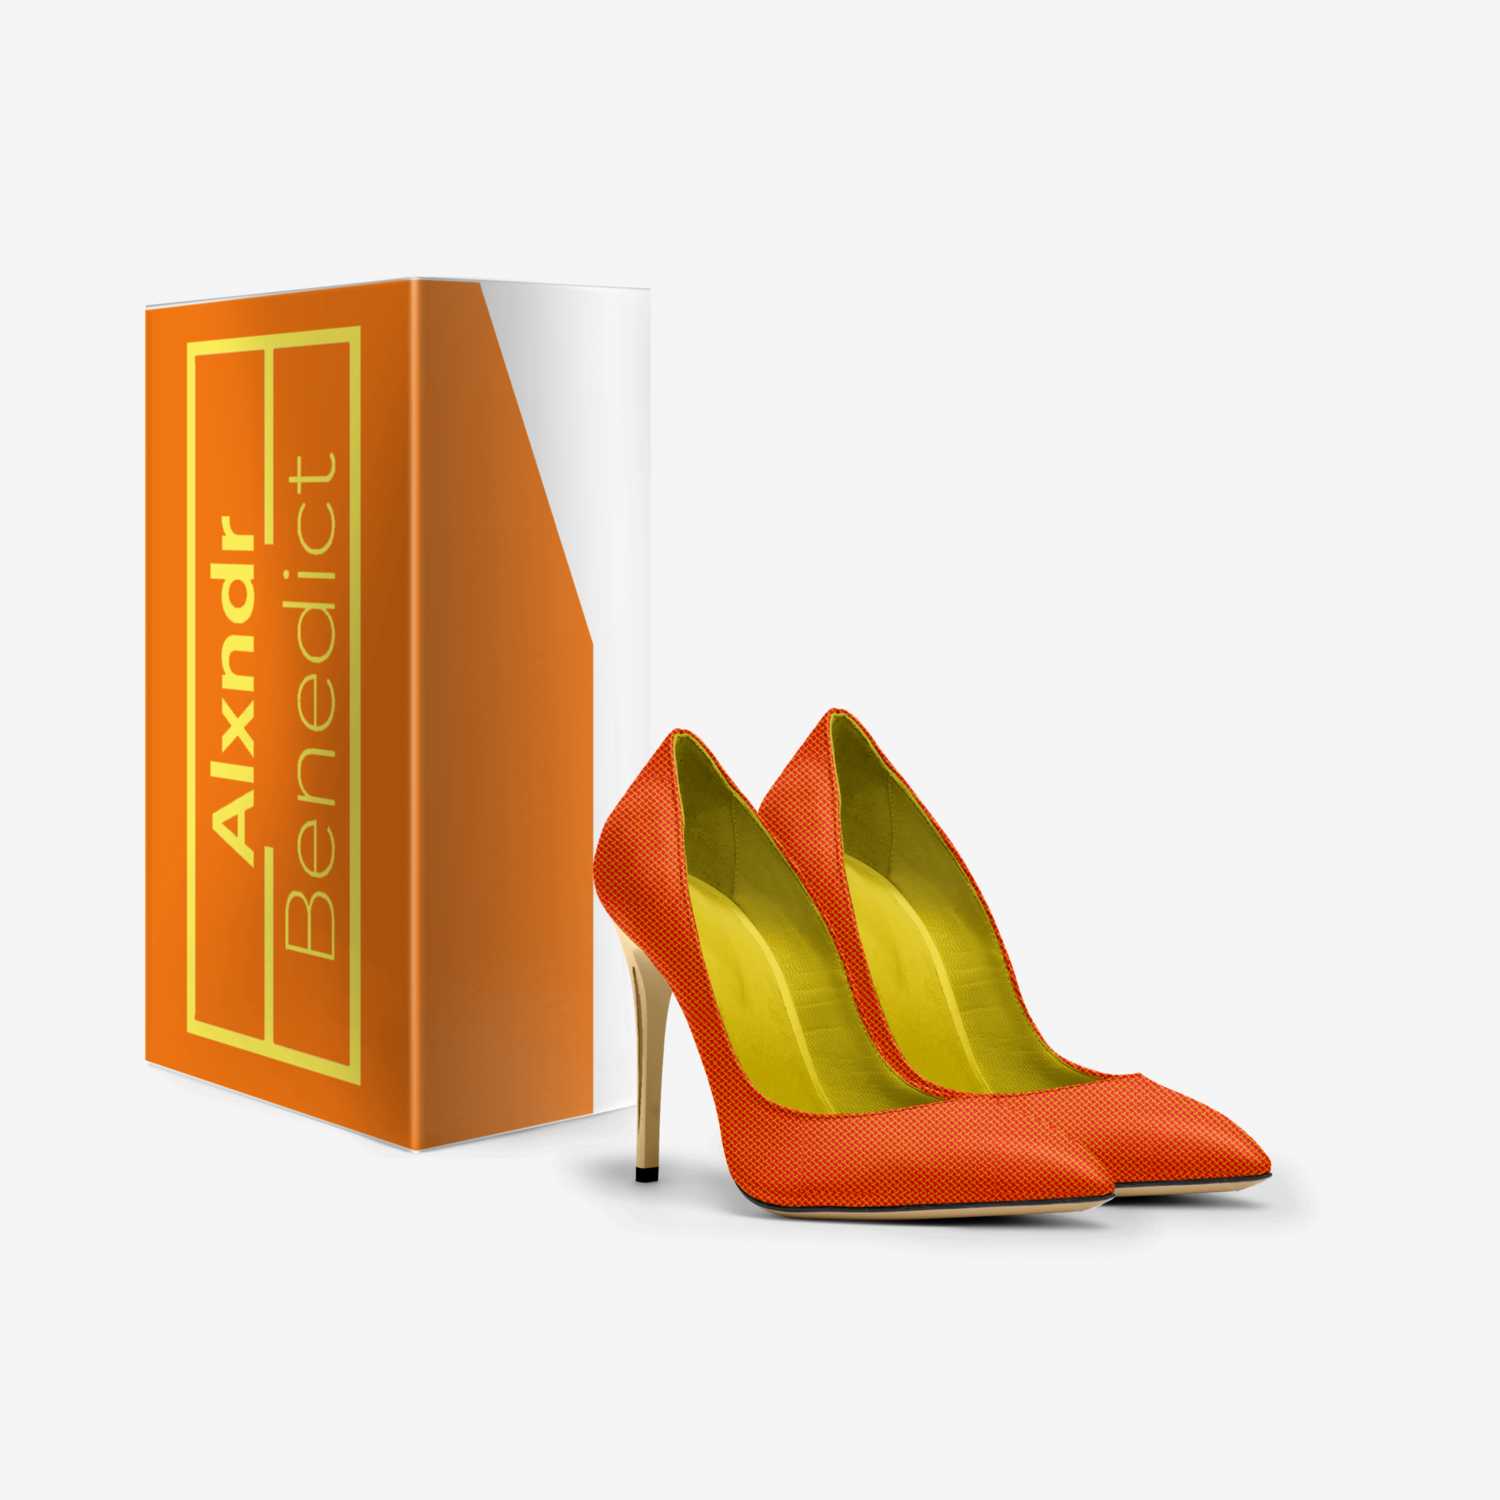 Crema De Naranja custom made in Italy shoes by Alexander Peters | Box view